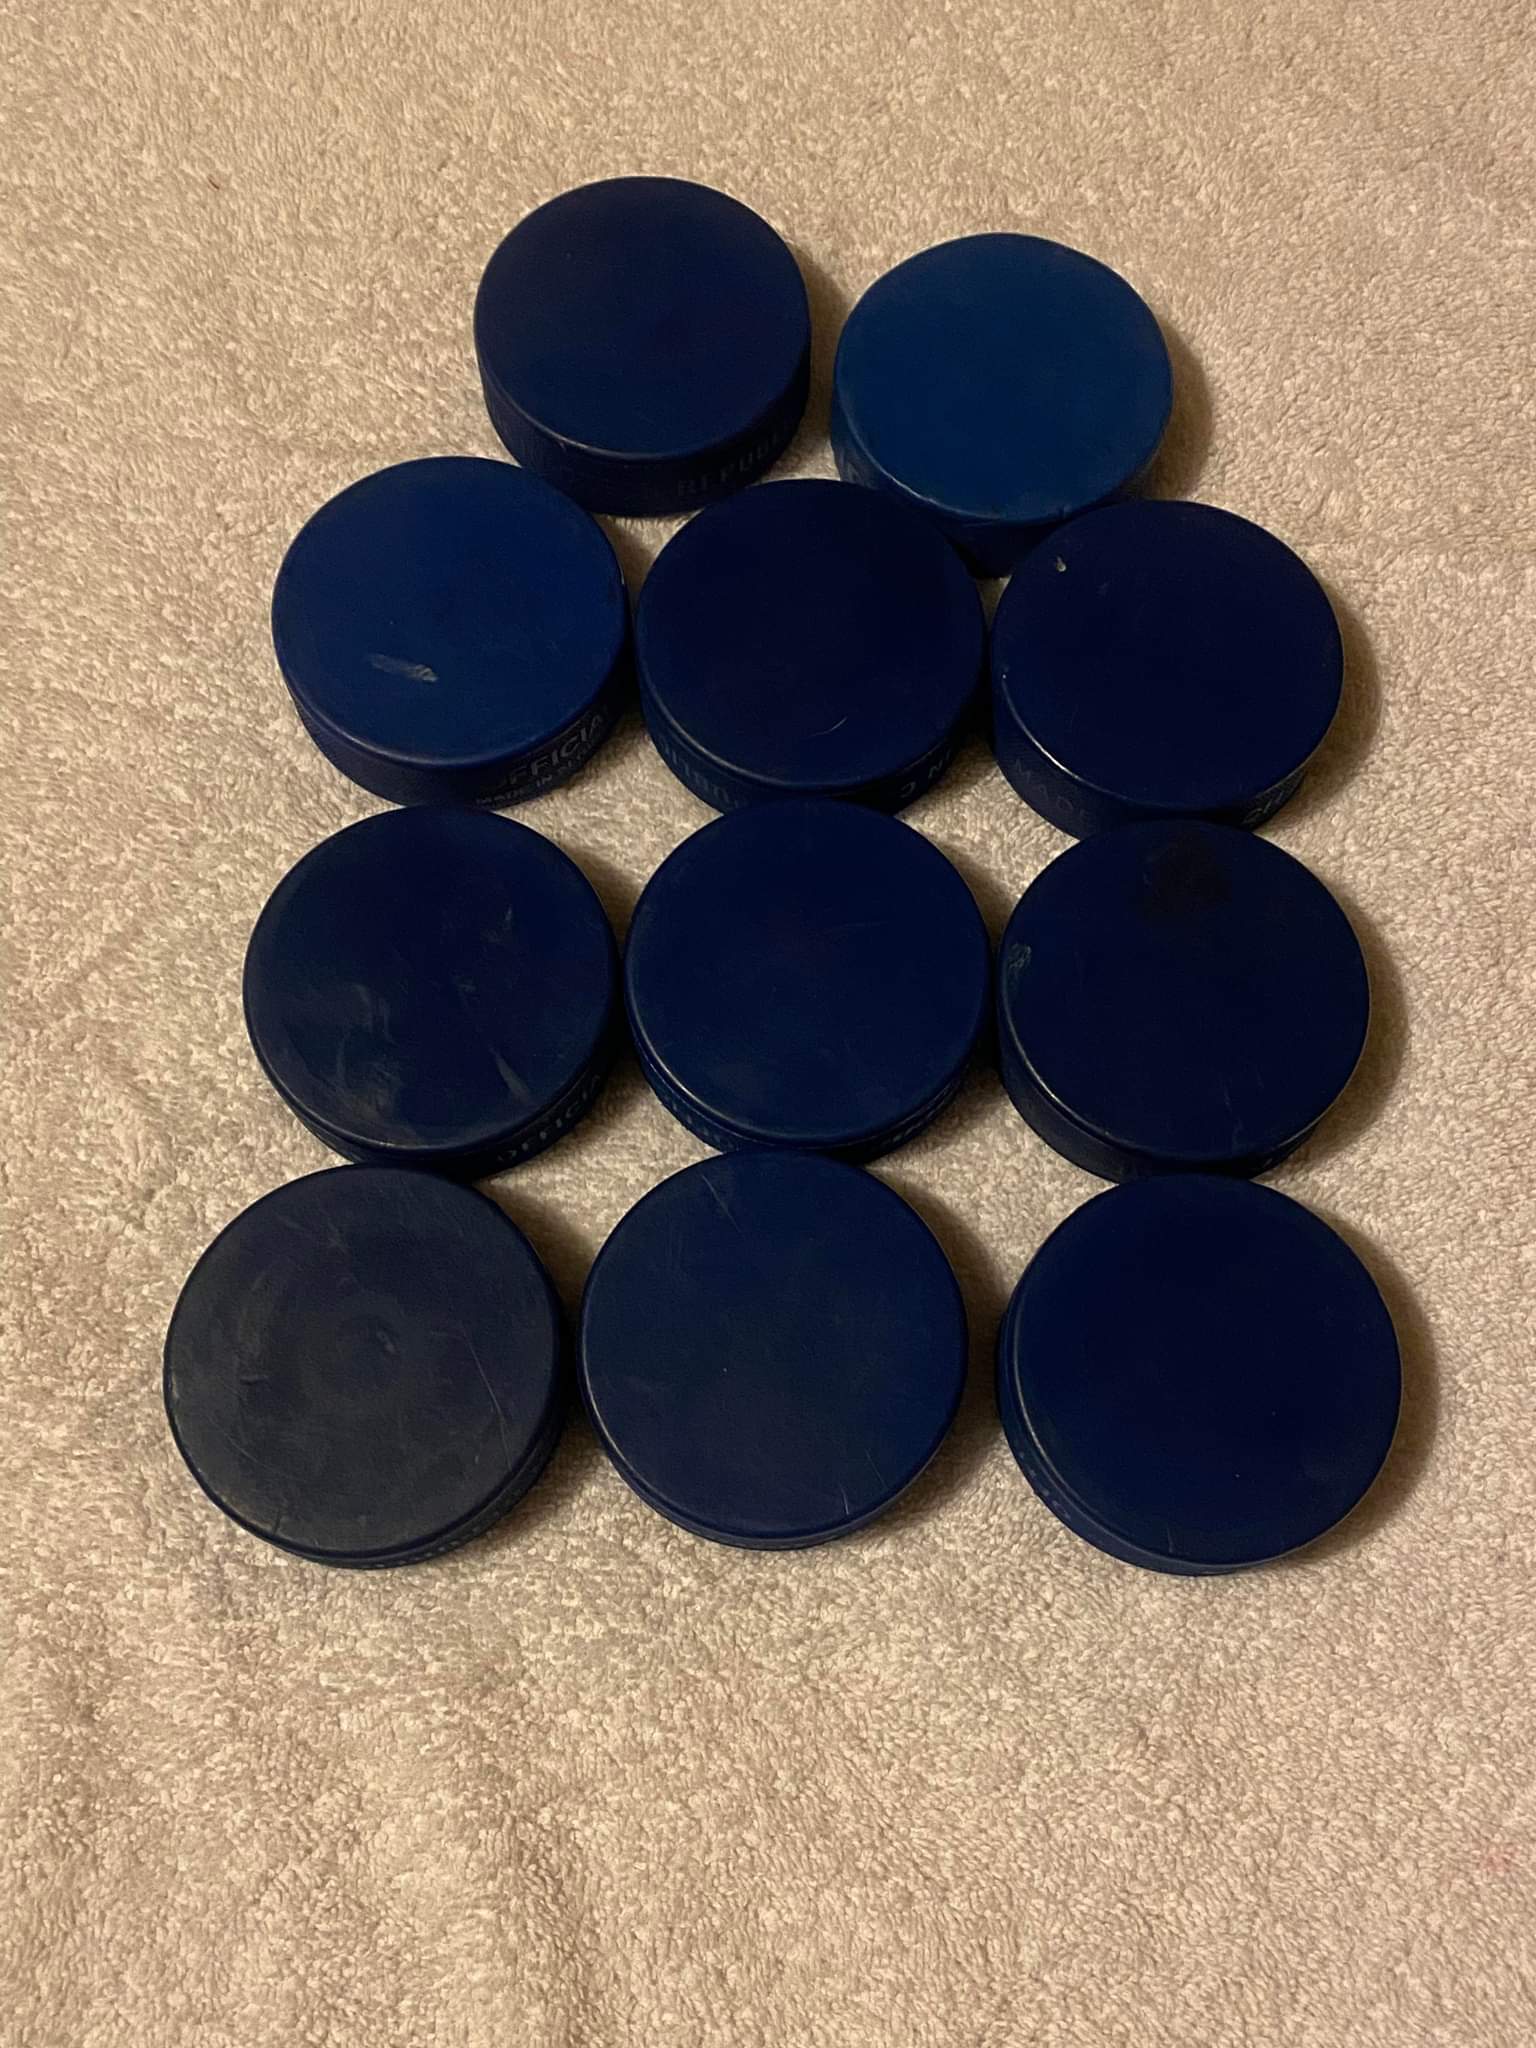 A&R 4 Pack Youth Mite Blue Ice Hockey PUCKS Official Size Lighter 4oz Weight 